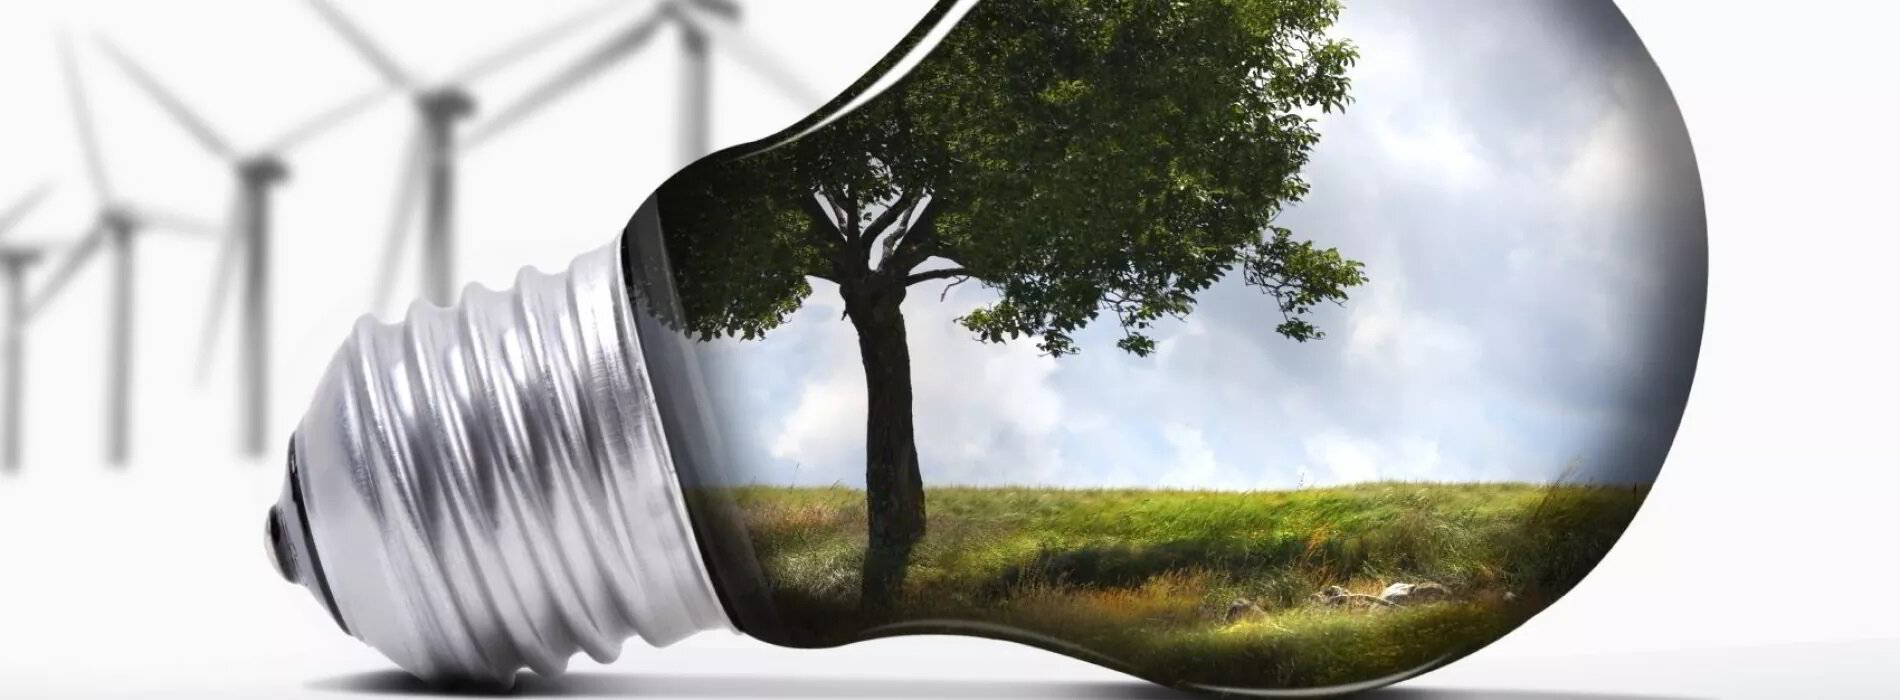 Image of Field and Tree in lightbulb